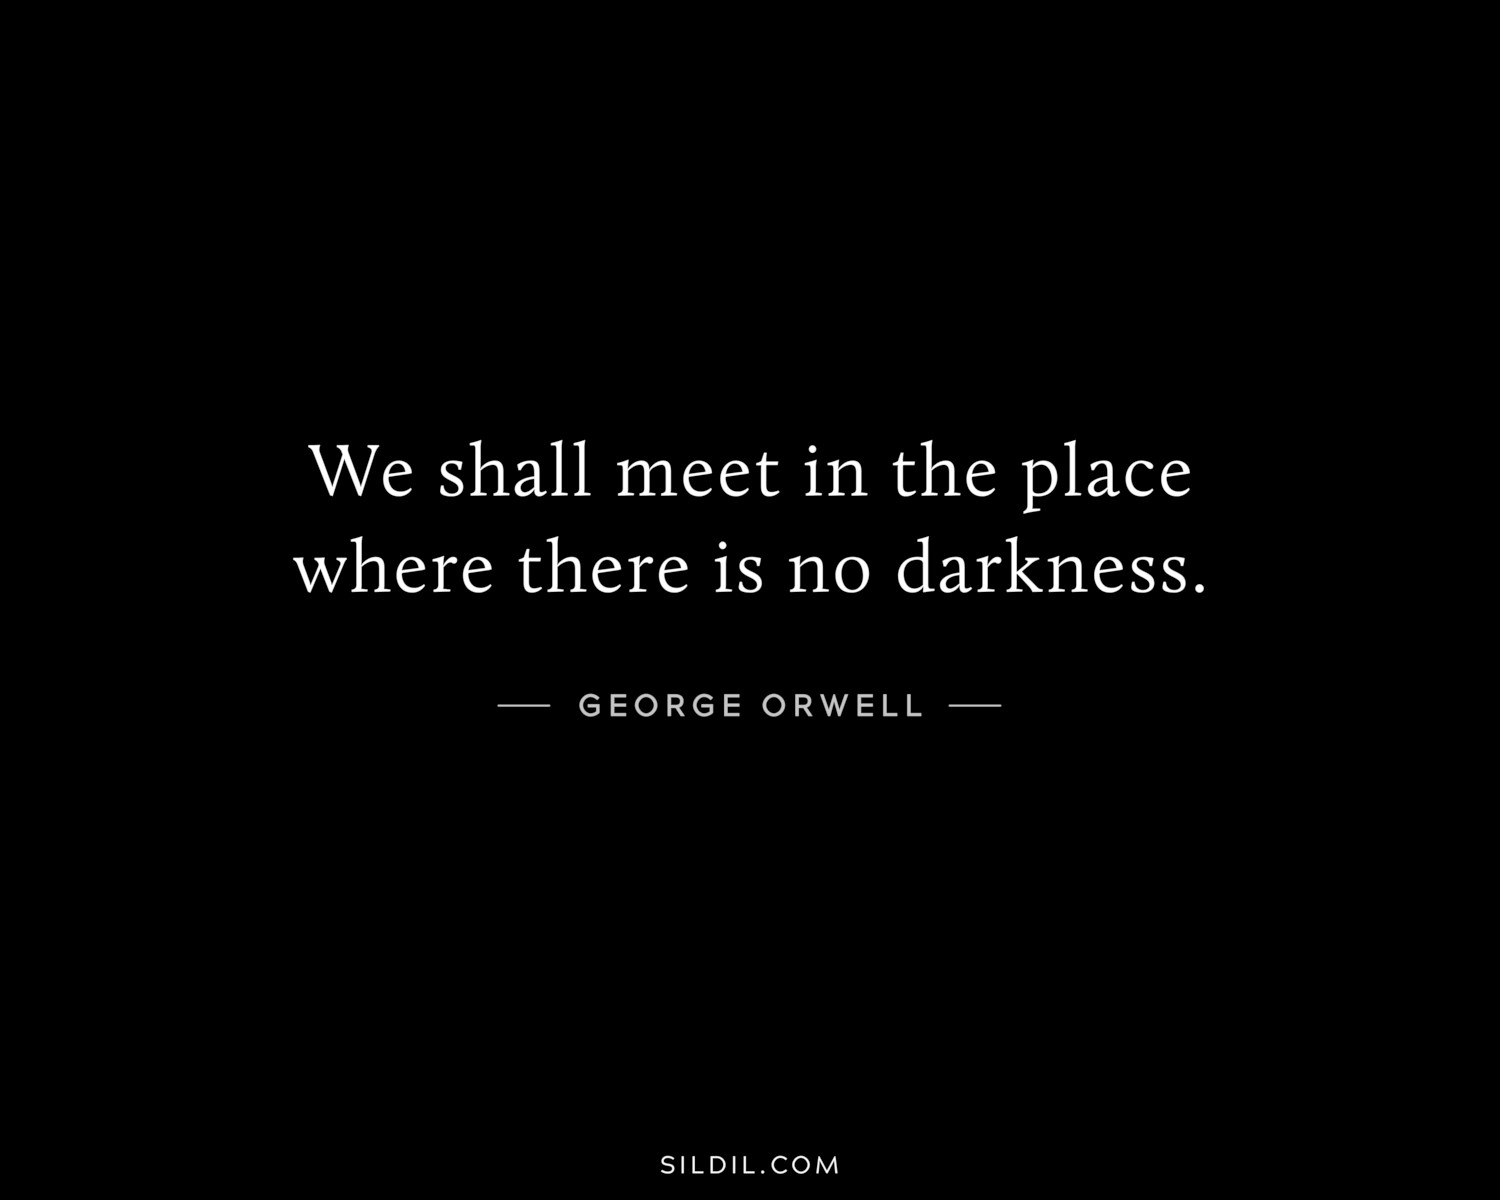 We shall meet in the place where there is no darkness.